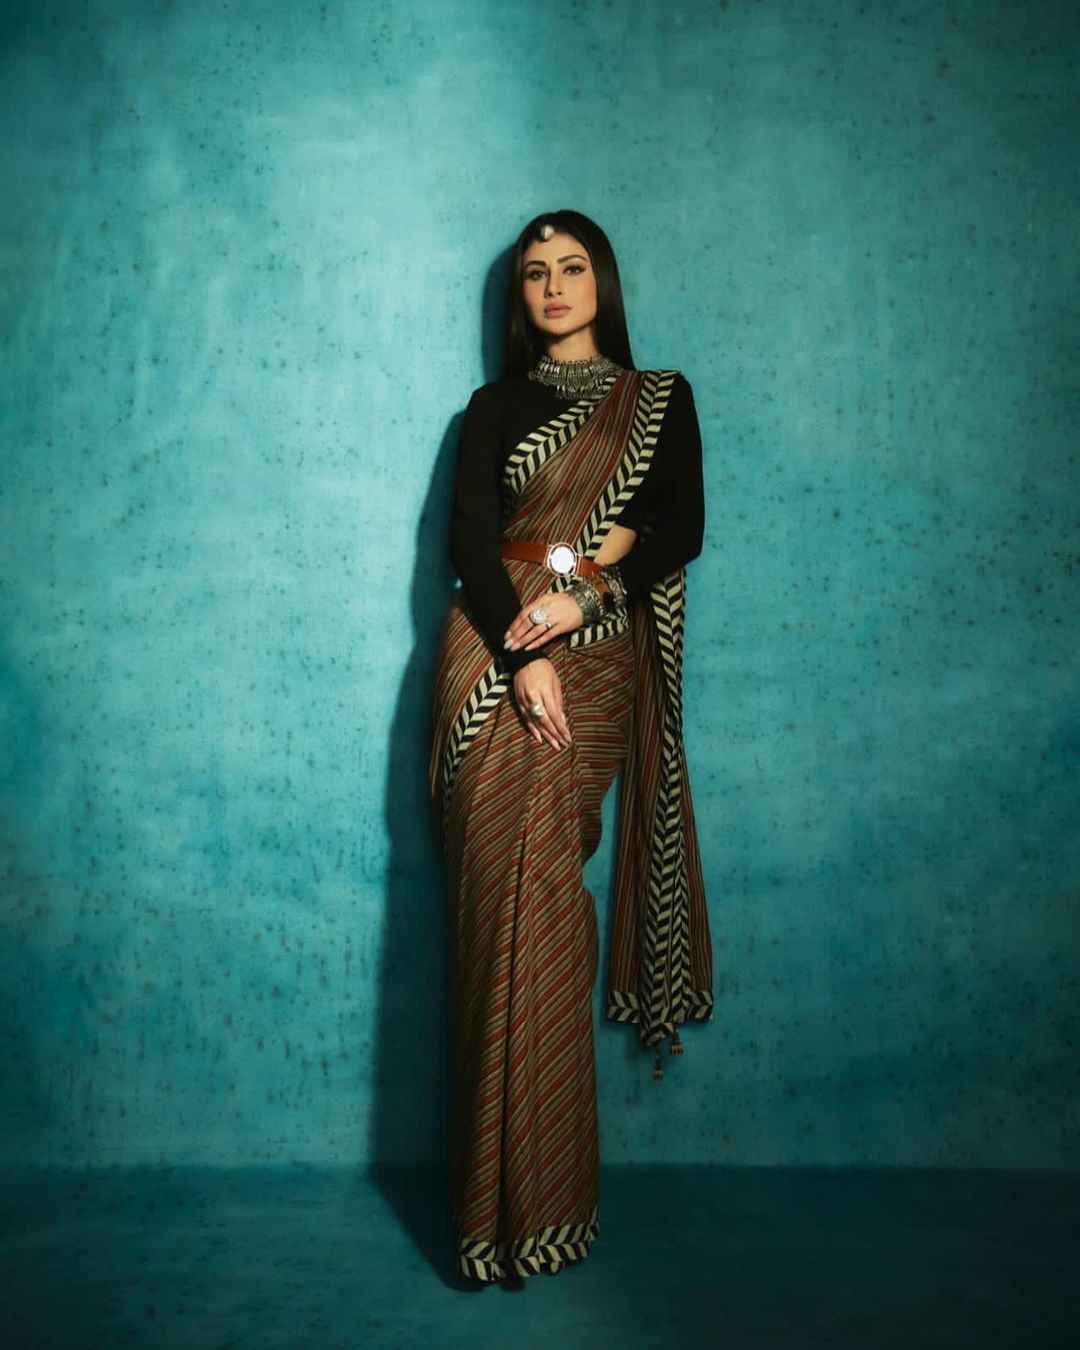 Mouni Roy looks elegant in the brown saree and black full-sleeve blouse